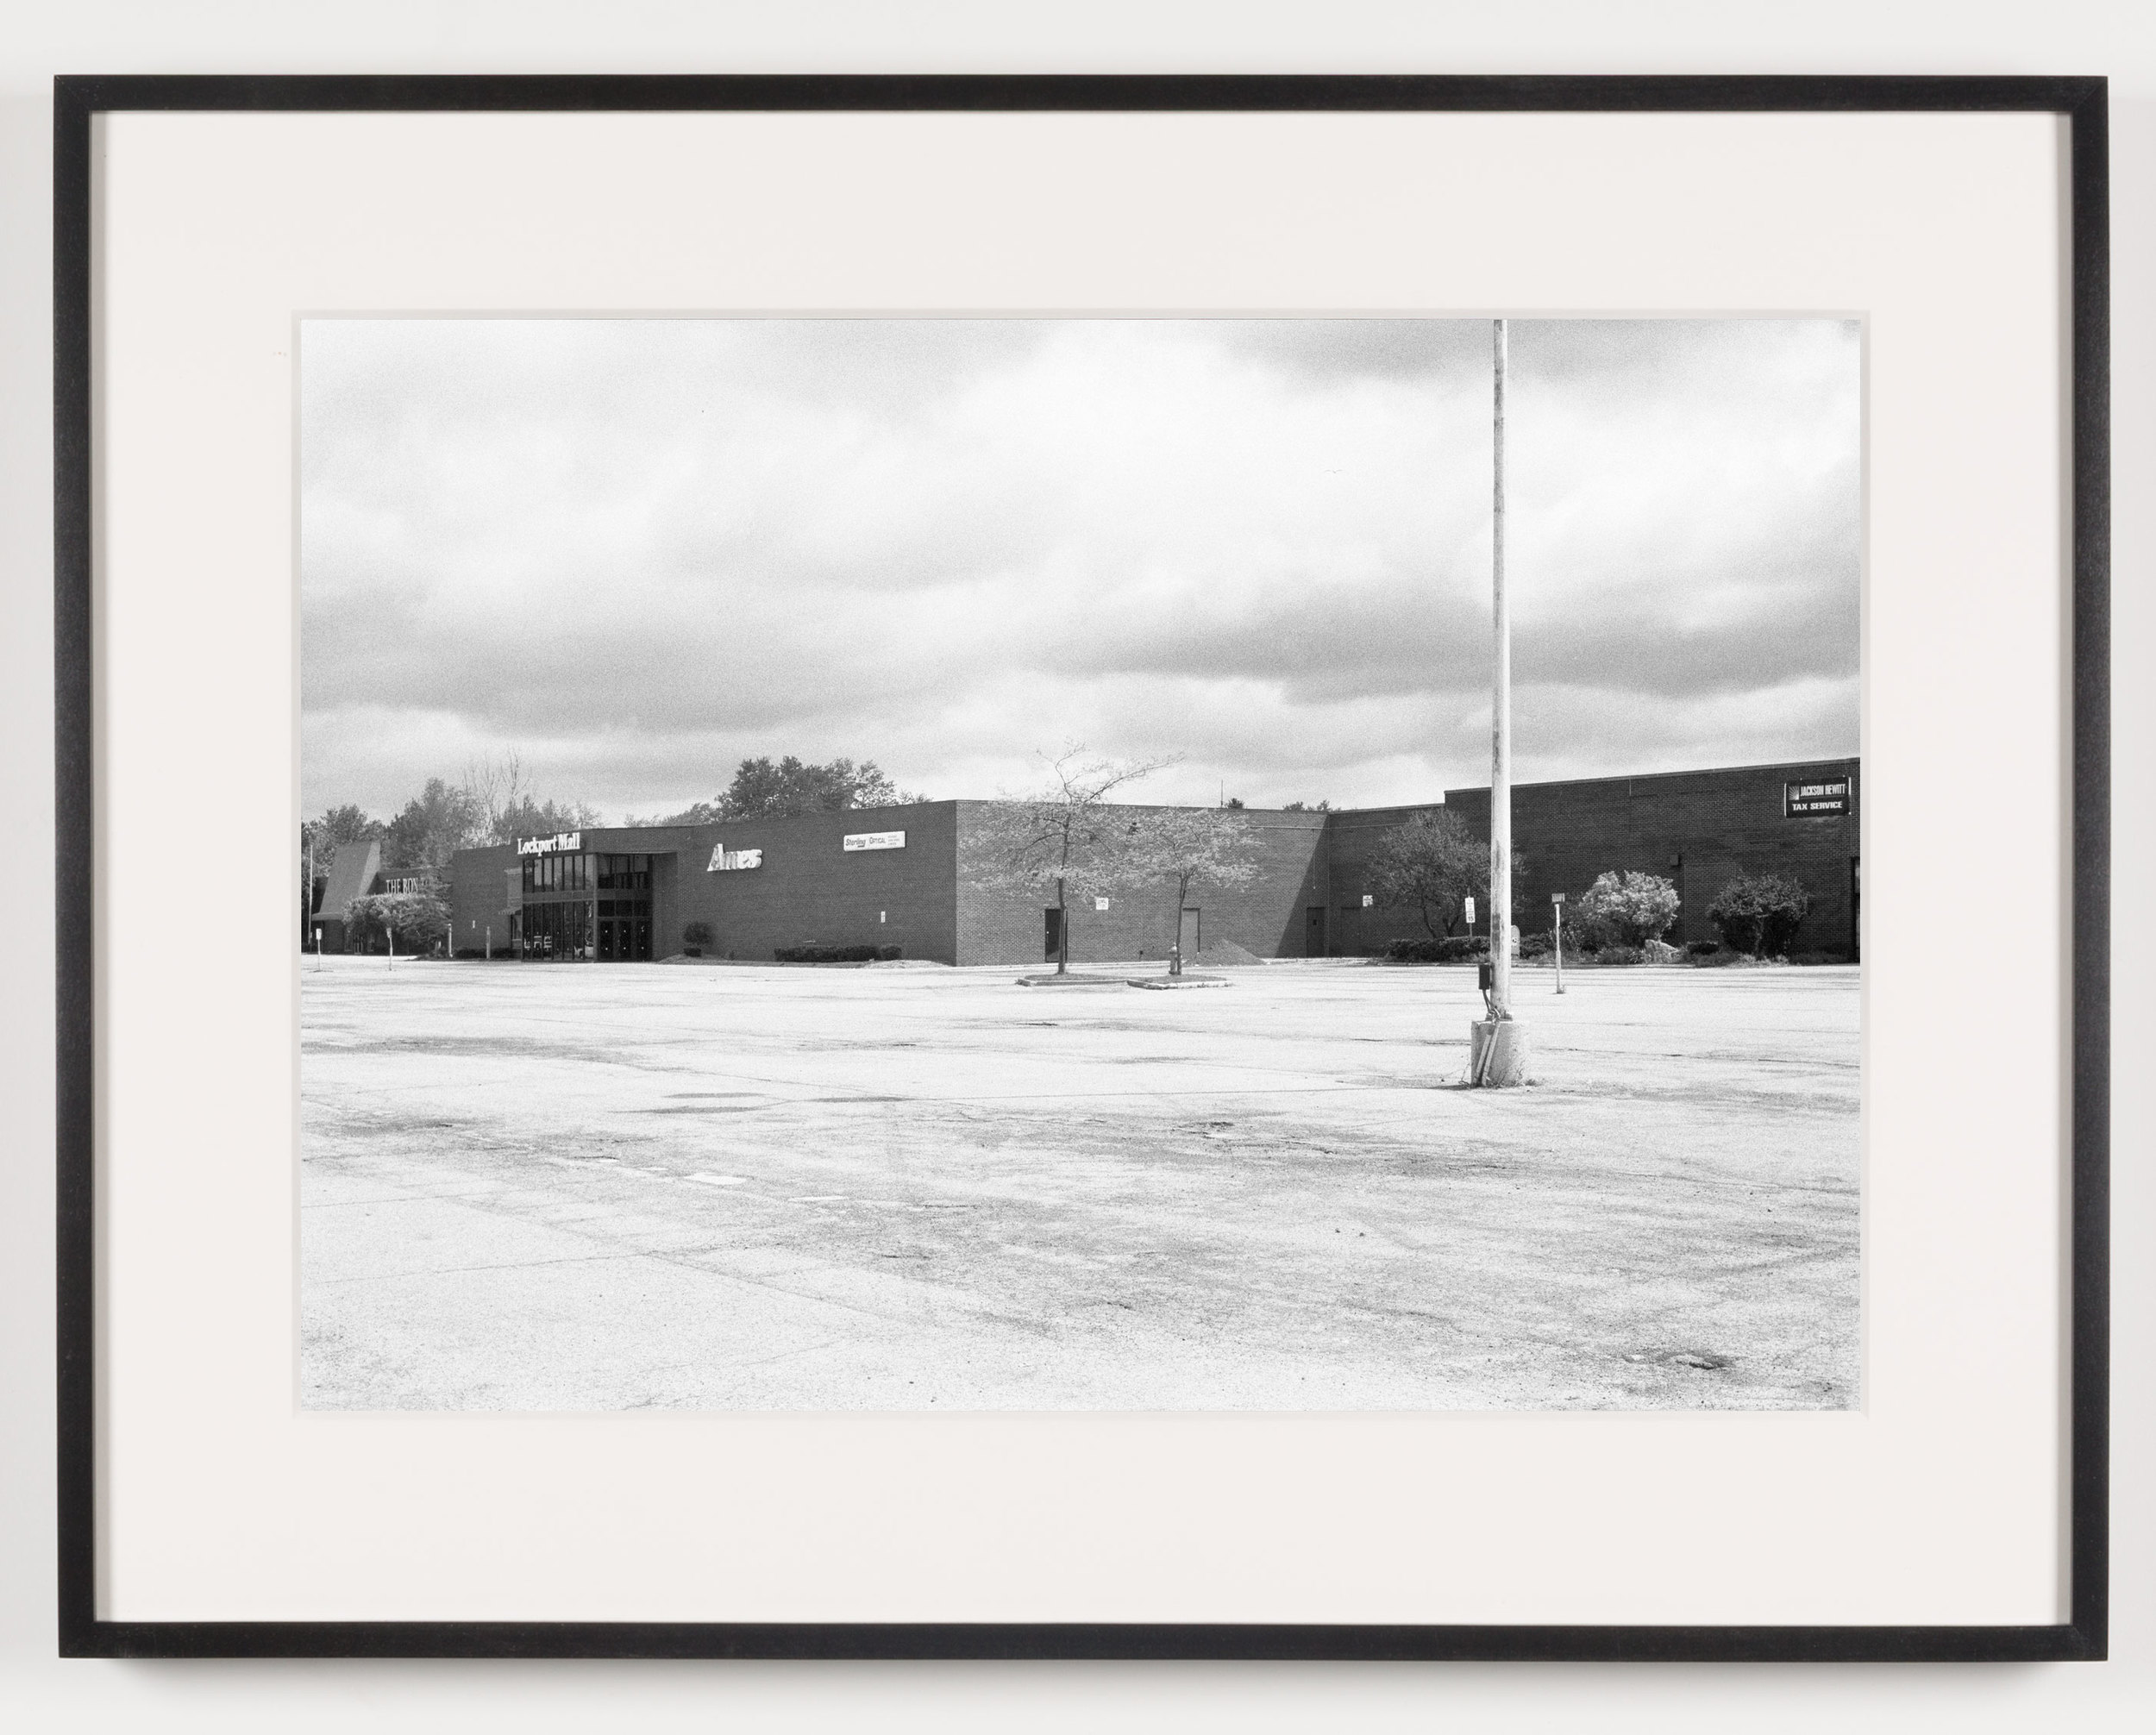   Lockport Mall (View of Exterior), Lockport, NY, Est. 1971, Demo. 2011    2011   Epson Ultrachrome K3 archival ink jet print on Hahnemühle Photo Rag paper  21 5/8 x 28 1/8 inches   American Passages, 2001–2011     